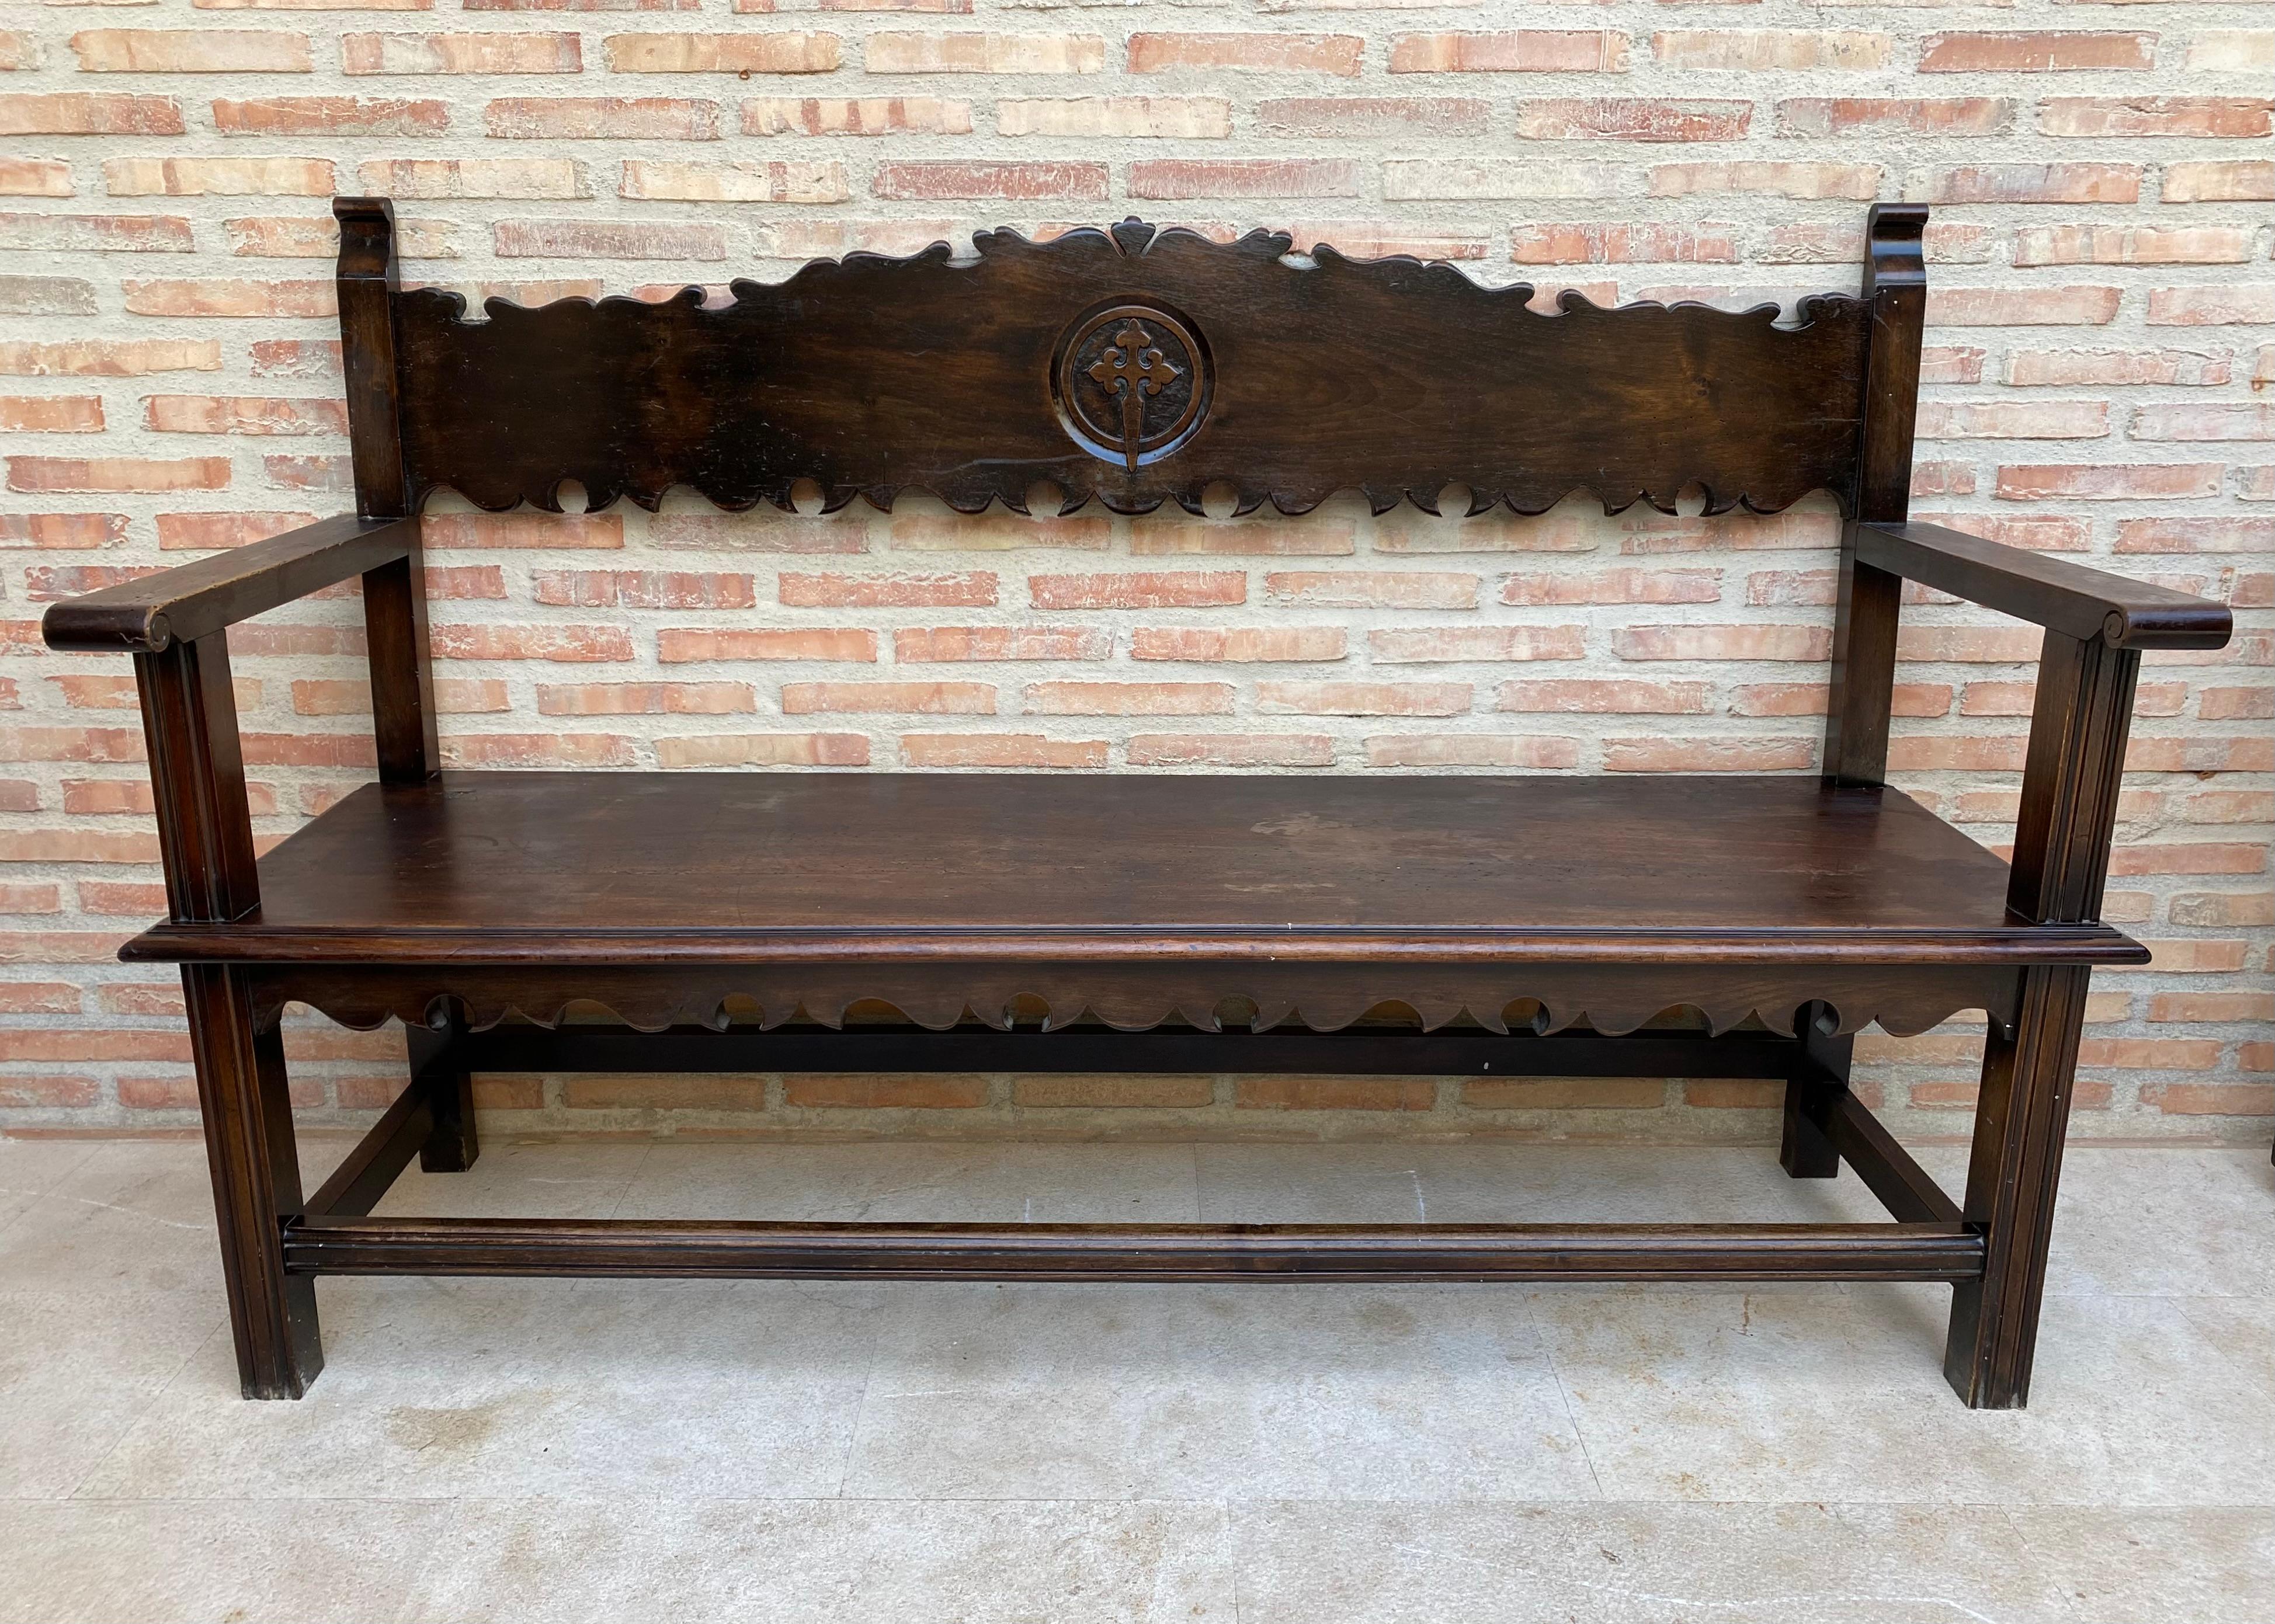 Renaissance Vintage French Bench in Wood, 1920 For Sale